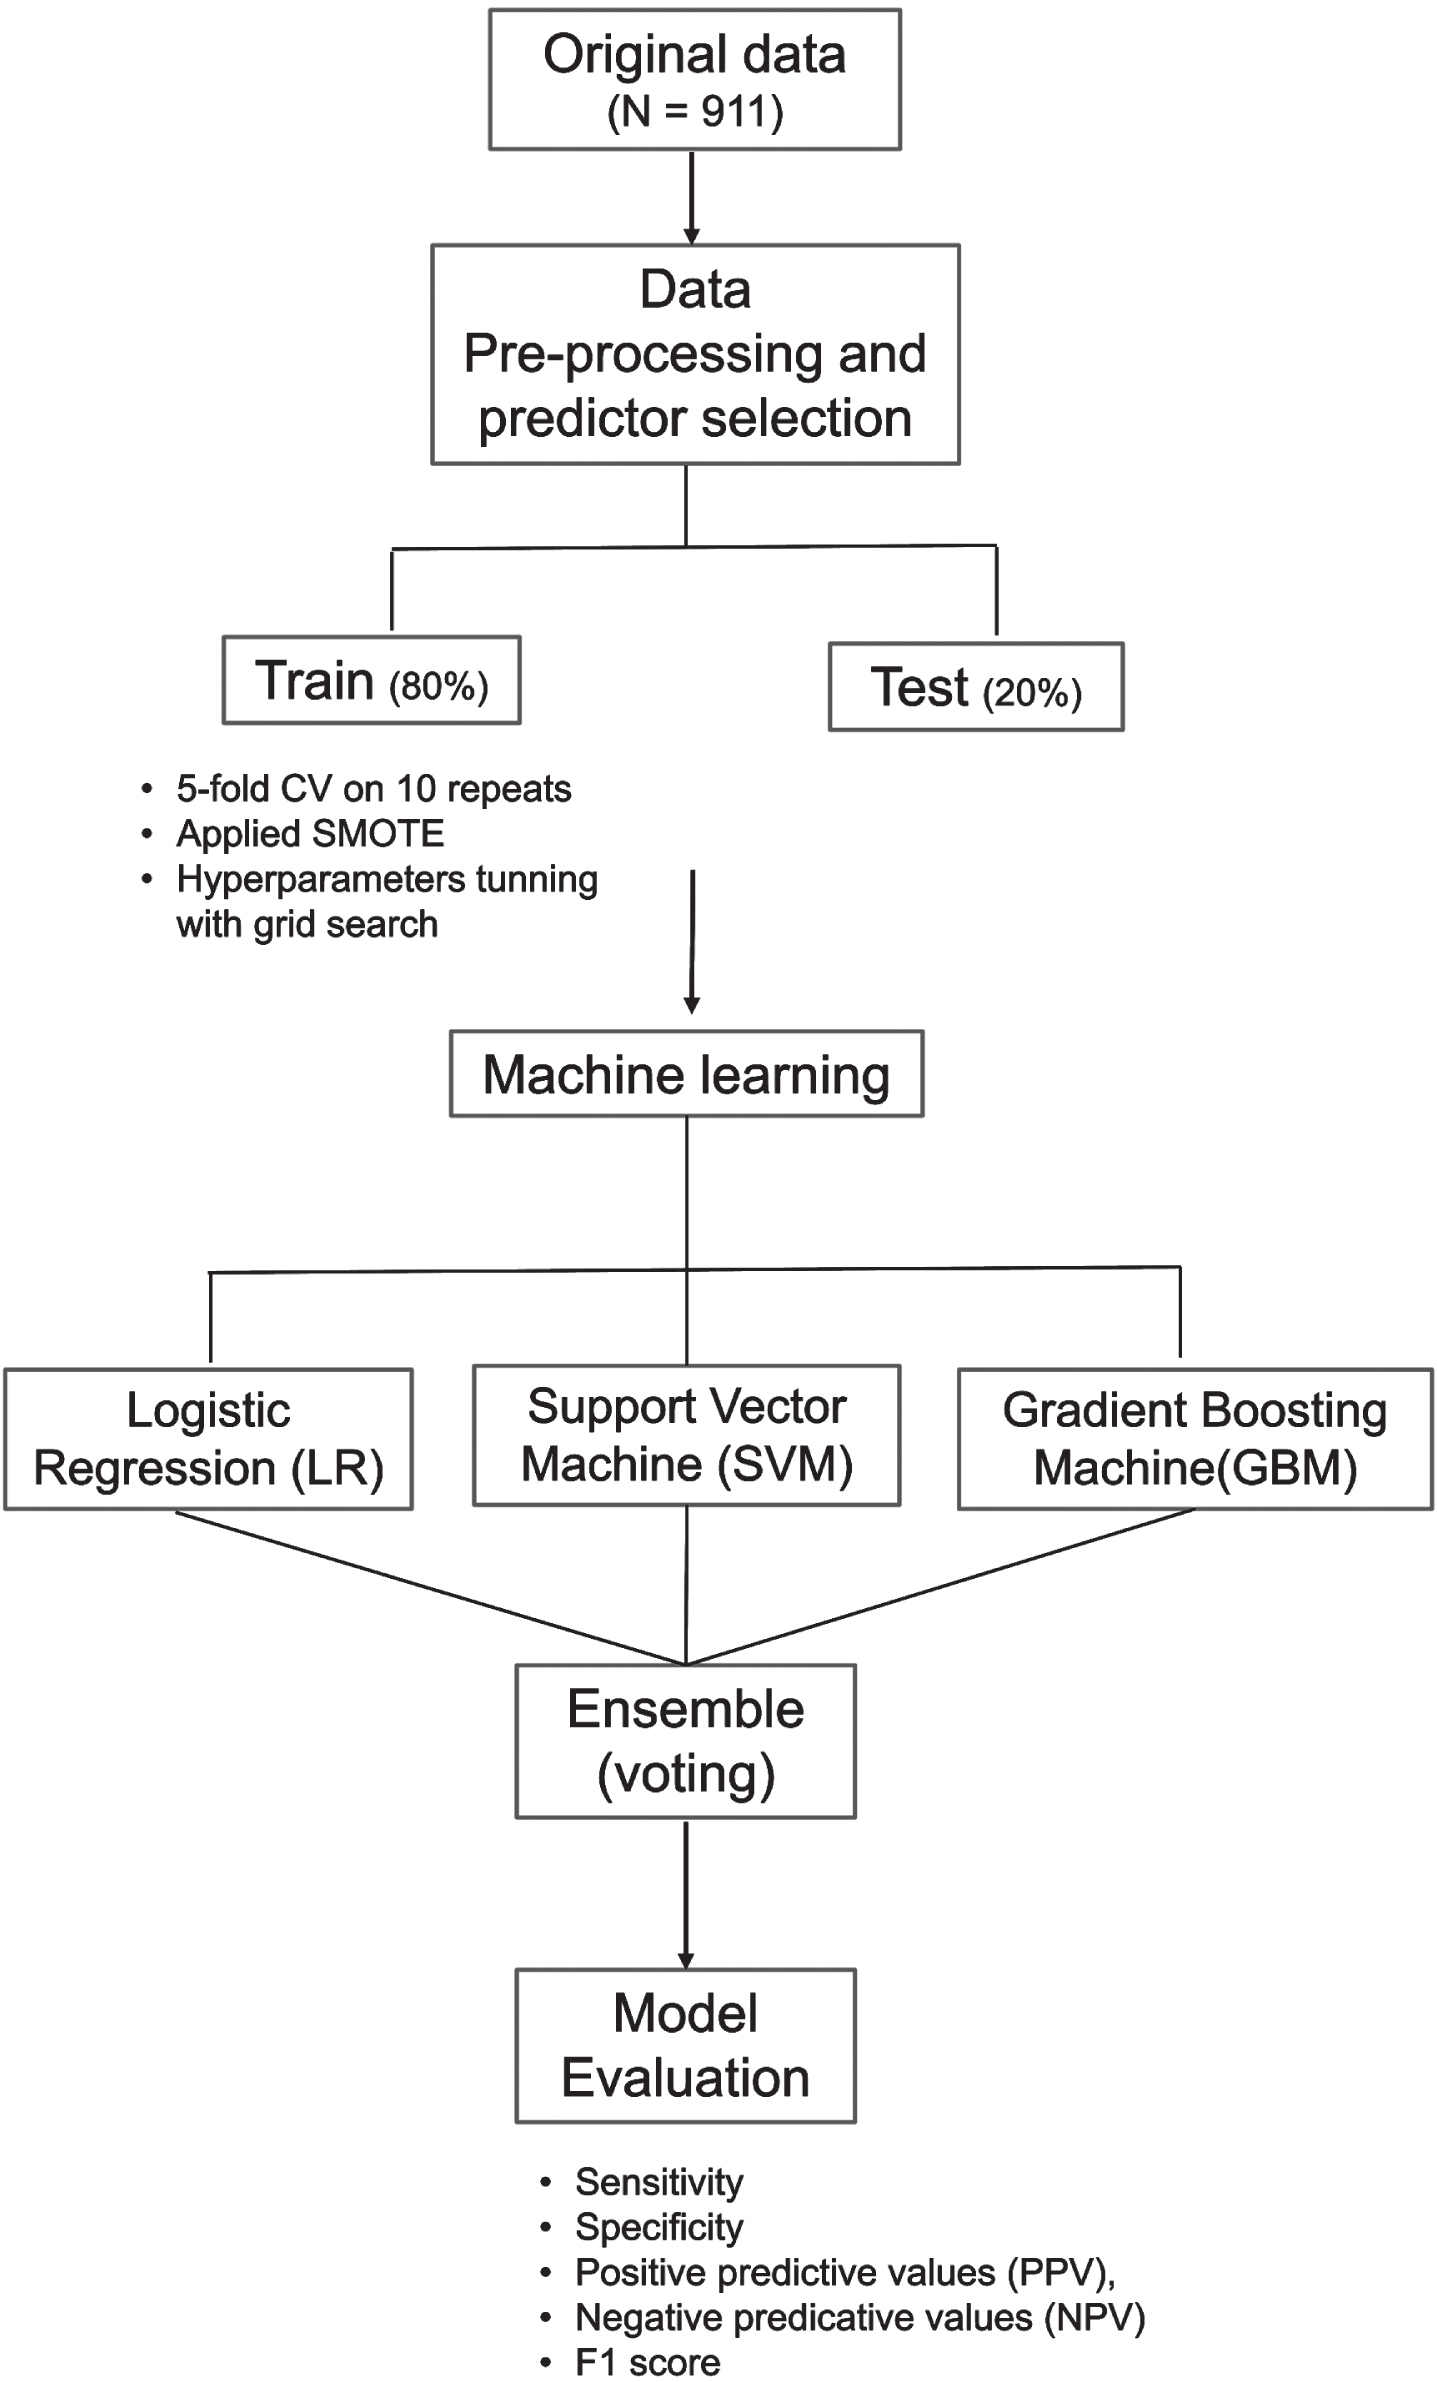 Machine learning pipeline. The machine learning model consist of three classifiers, logistic regression (LR), support vector machine (SVM), and gradient boosting machine (GBM). Prediction results of LR, SVM, and GBM combined in an ensemble model to derive the final prediction using majority vote. Model was trained and validated using five-fold cross validation (CV) on 10 repeats. Synthetic minority over-sampling technique (SMOTE) was applied on the train data.